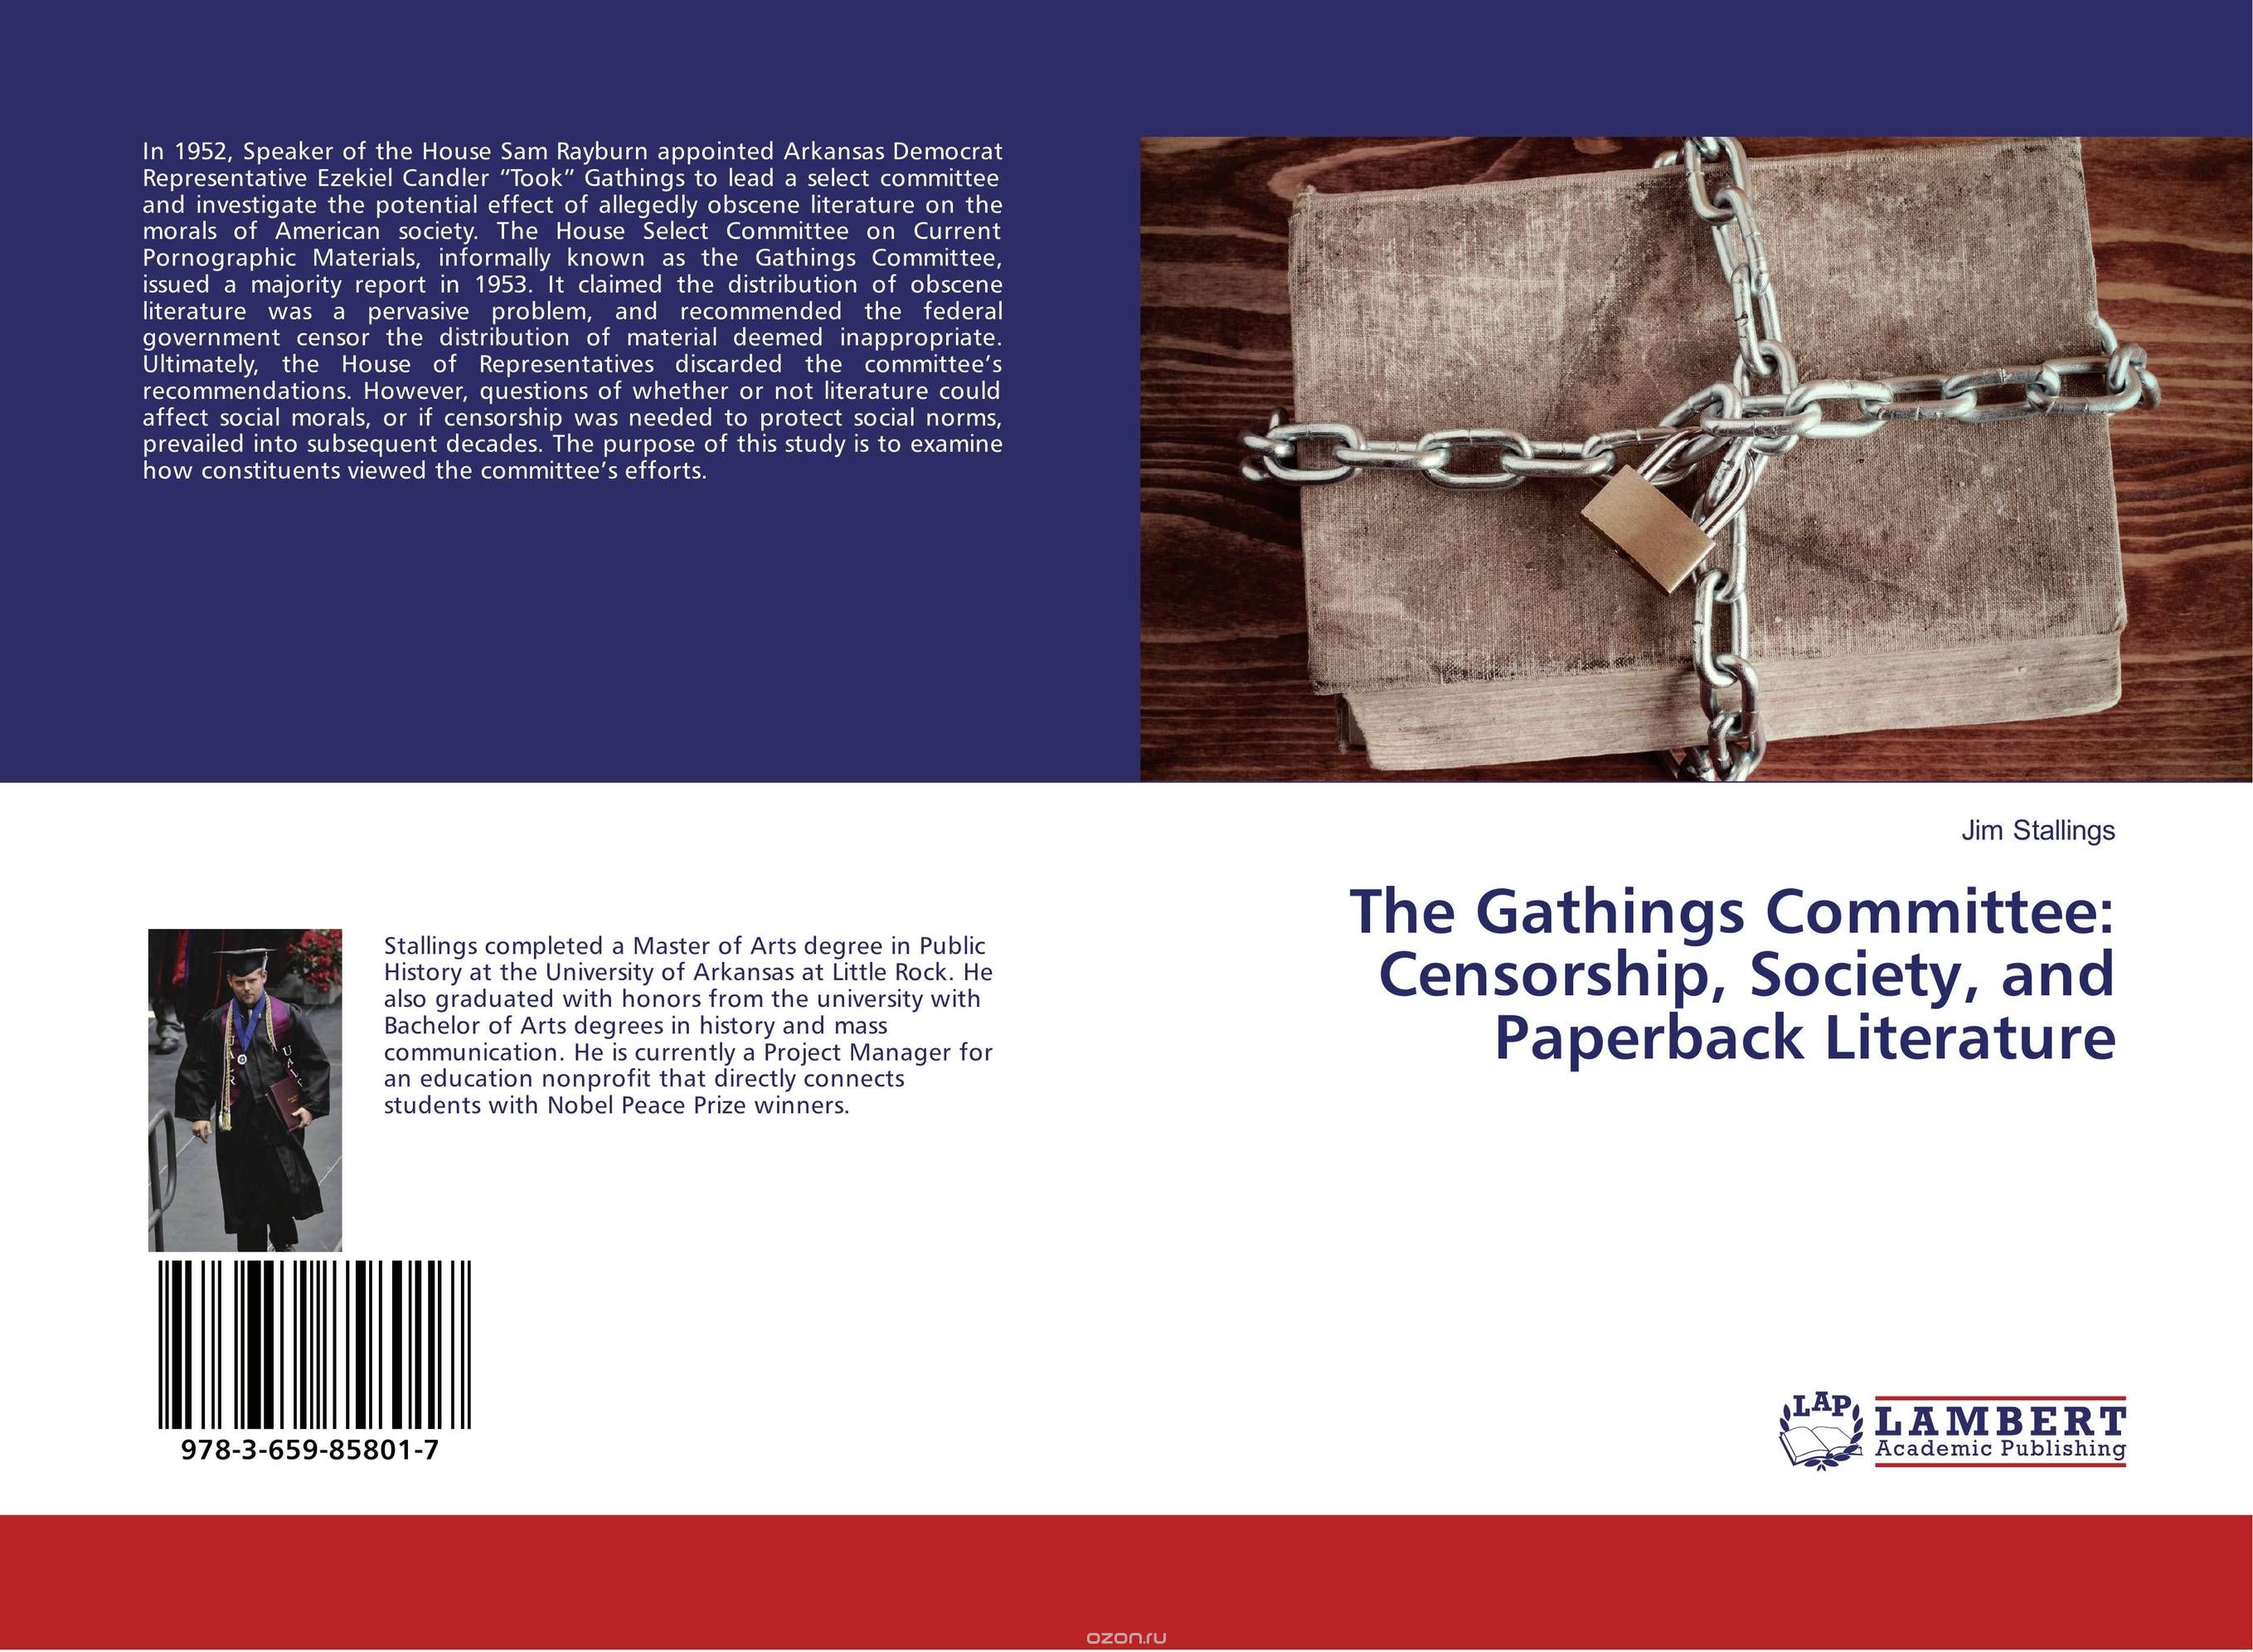 The Gathings Committee: Censorship, Society, and Paperback Literature